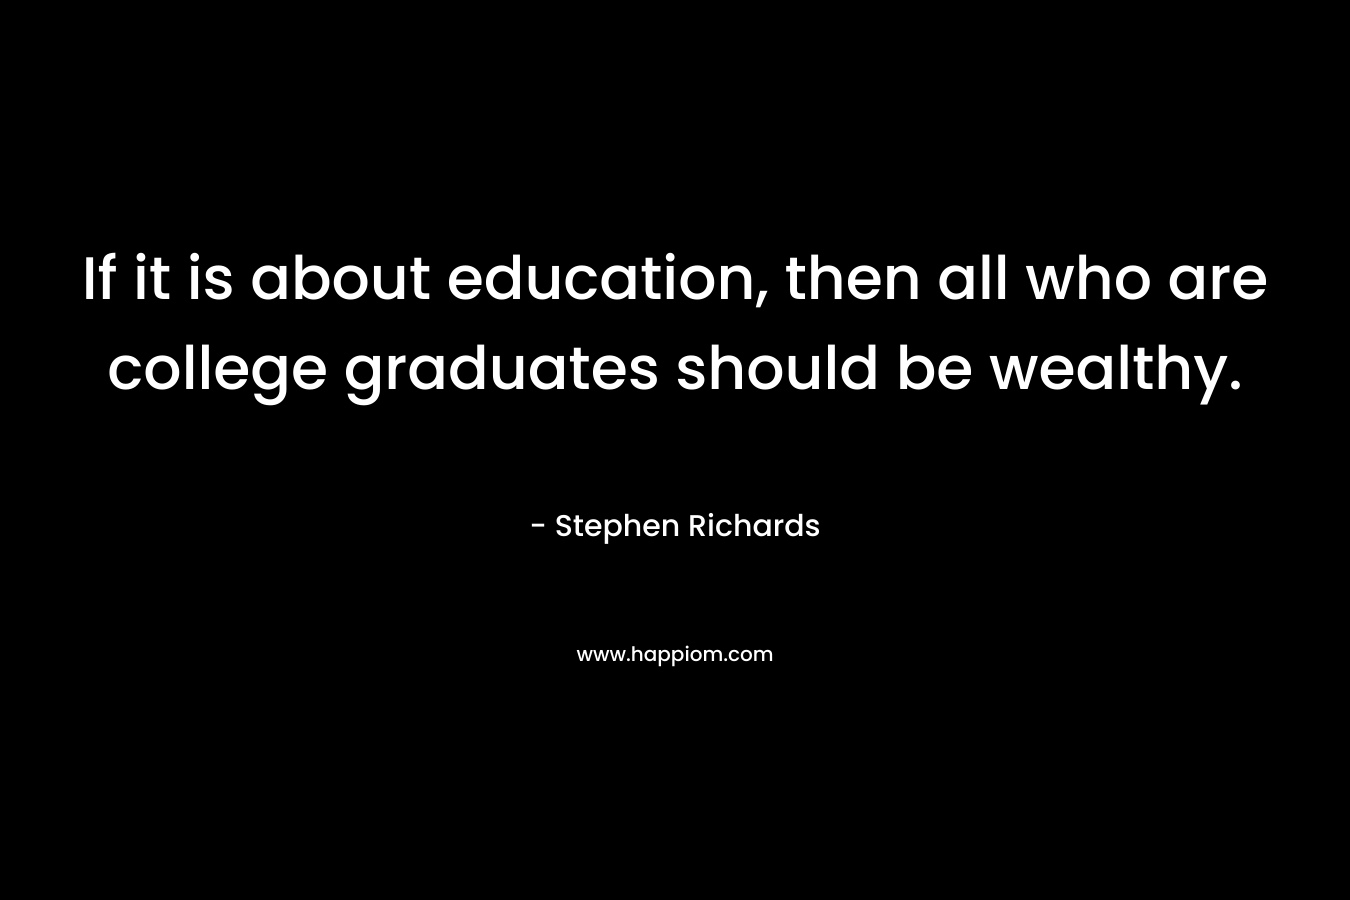 If it is about education, then all who are college graduates should be wealthy. – Stephen Richards